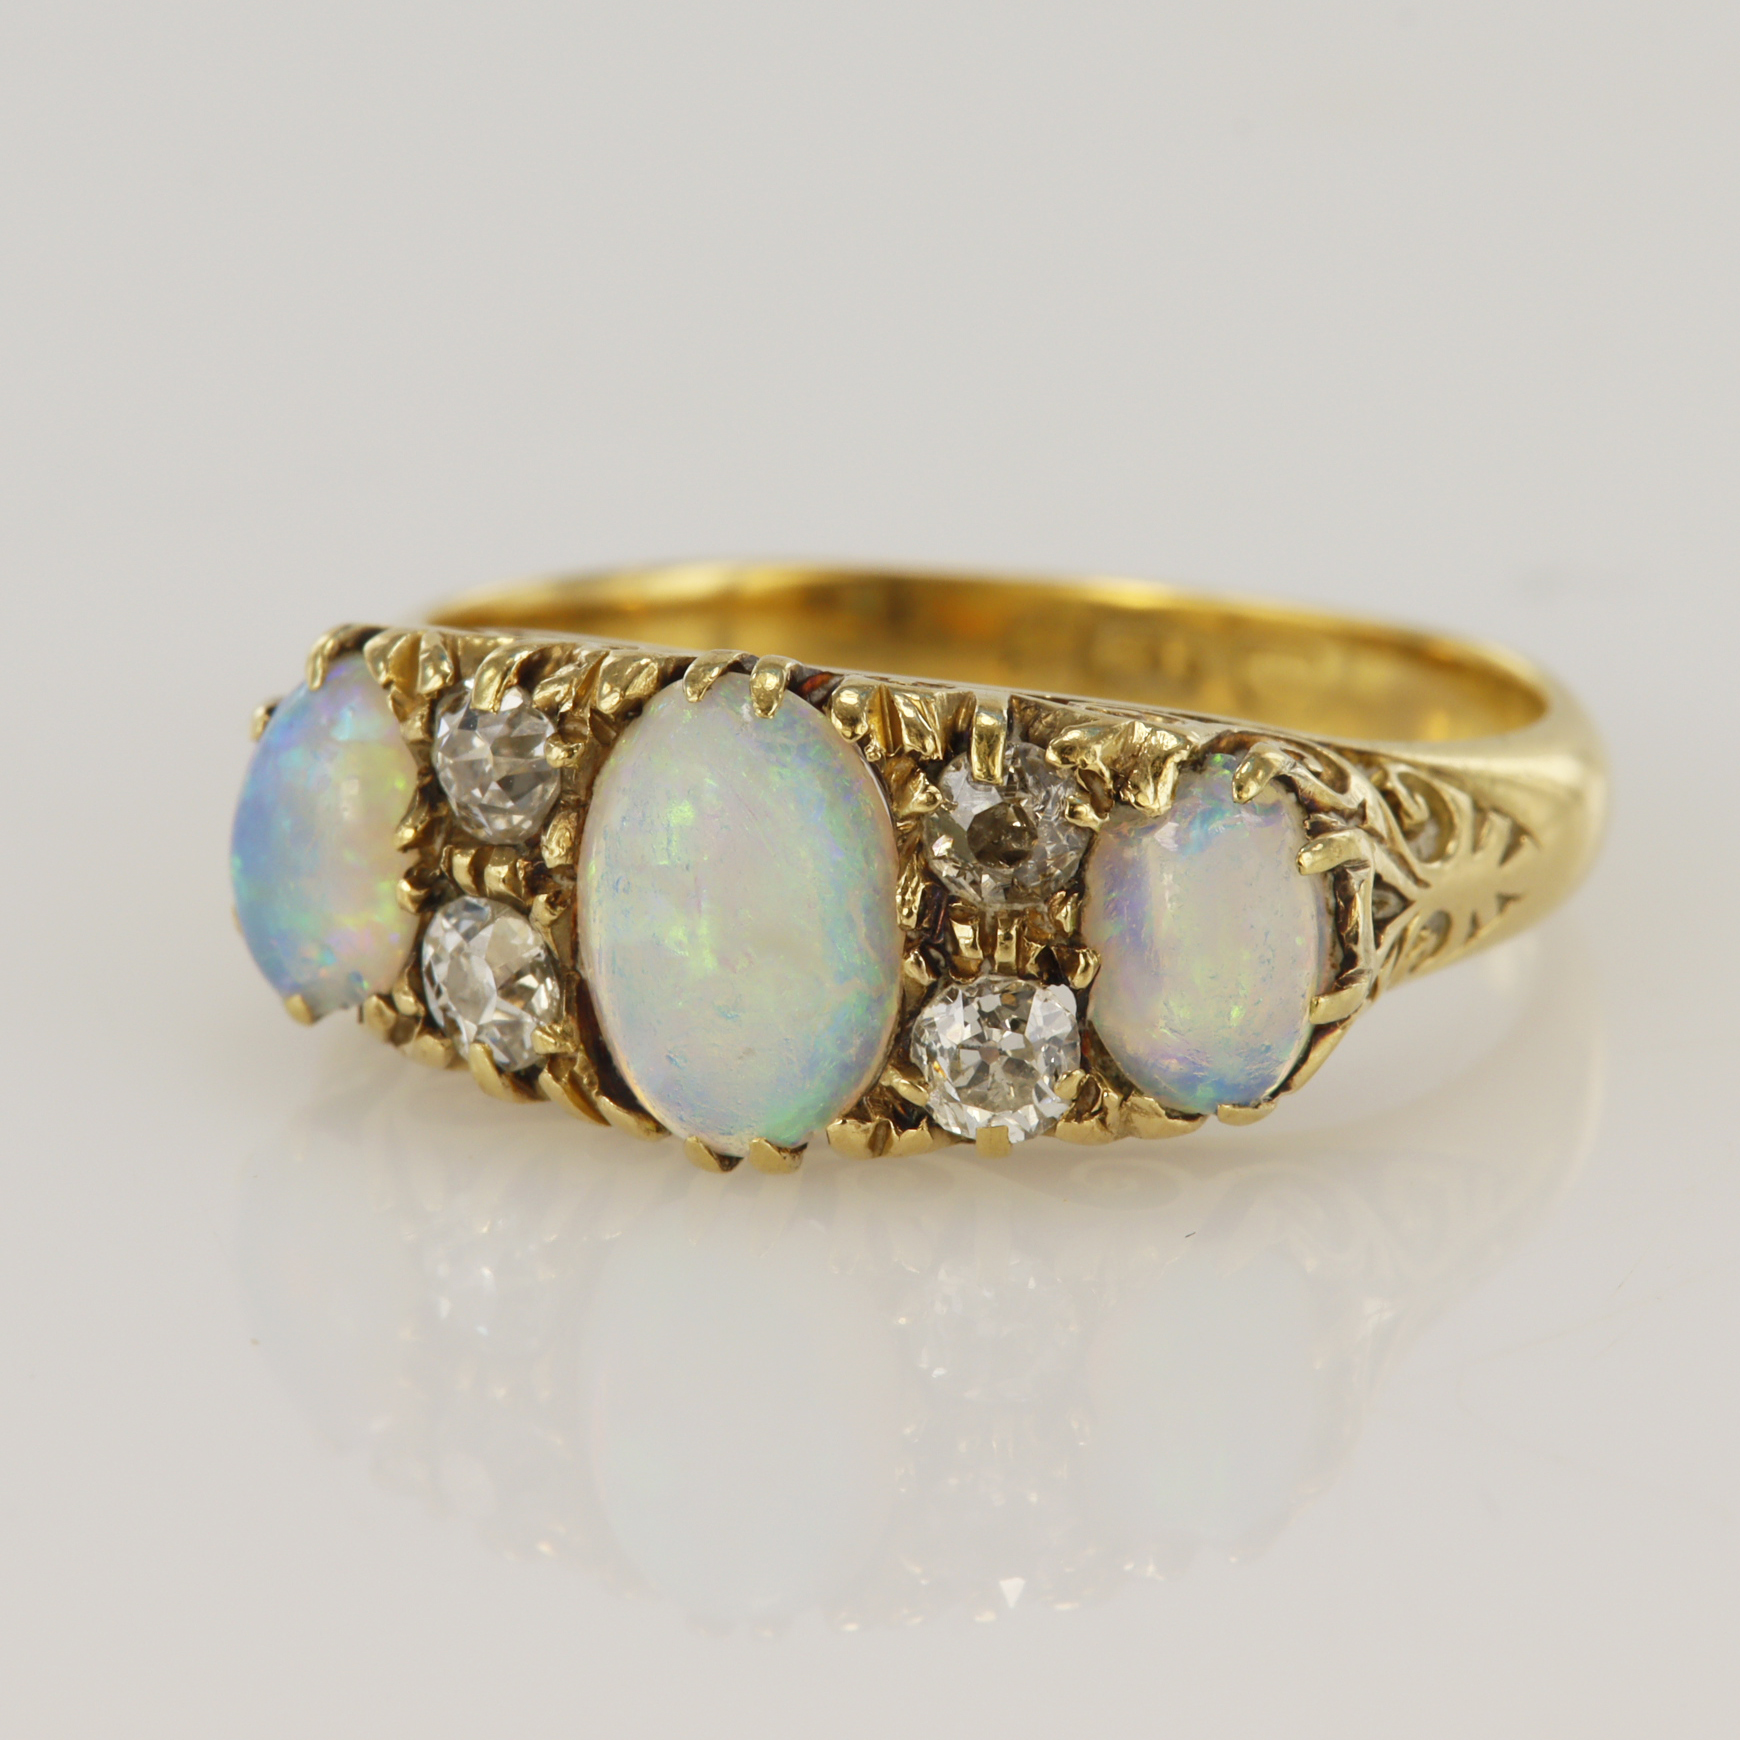 Yellow gold (tests 18ct) antique diamond and opal dress ring, three graduating opals, principle